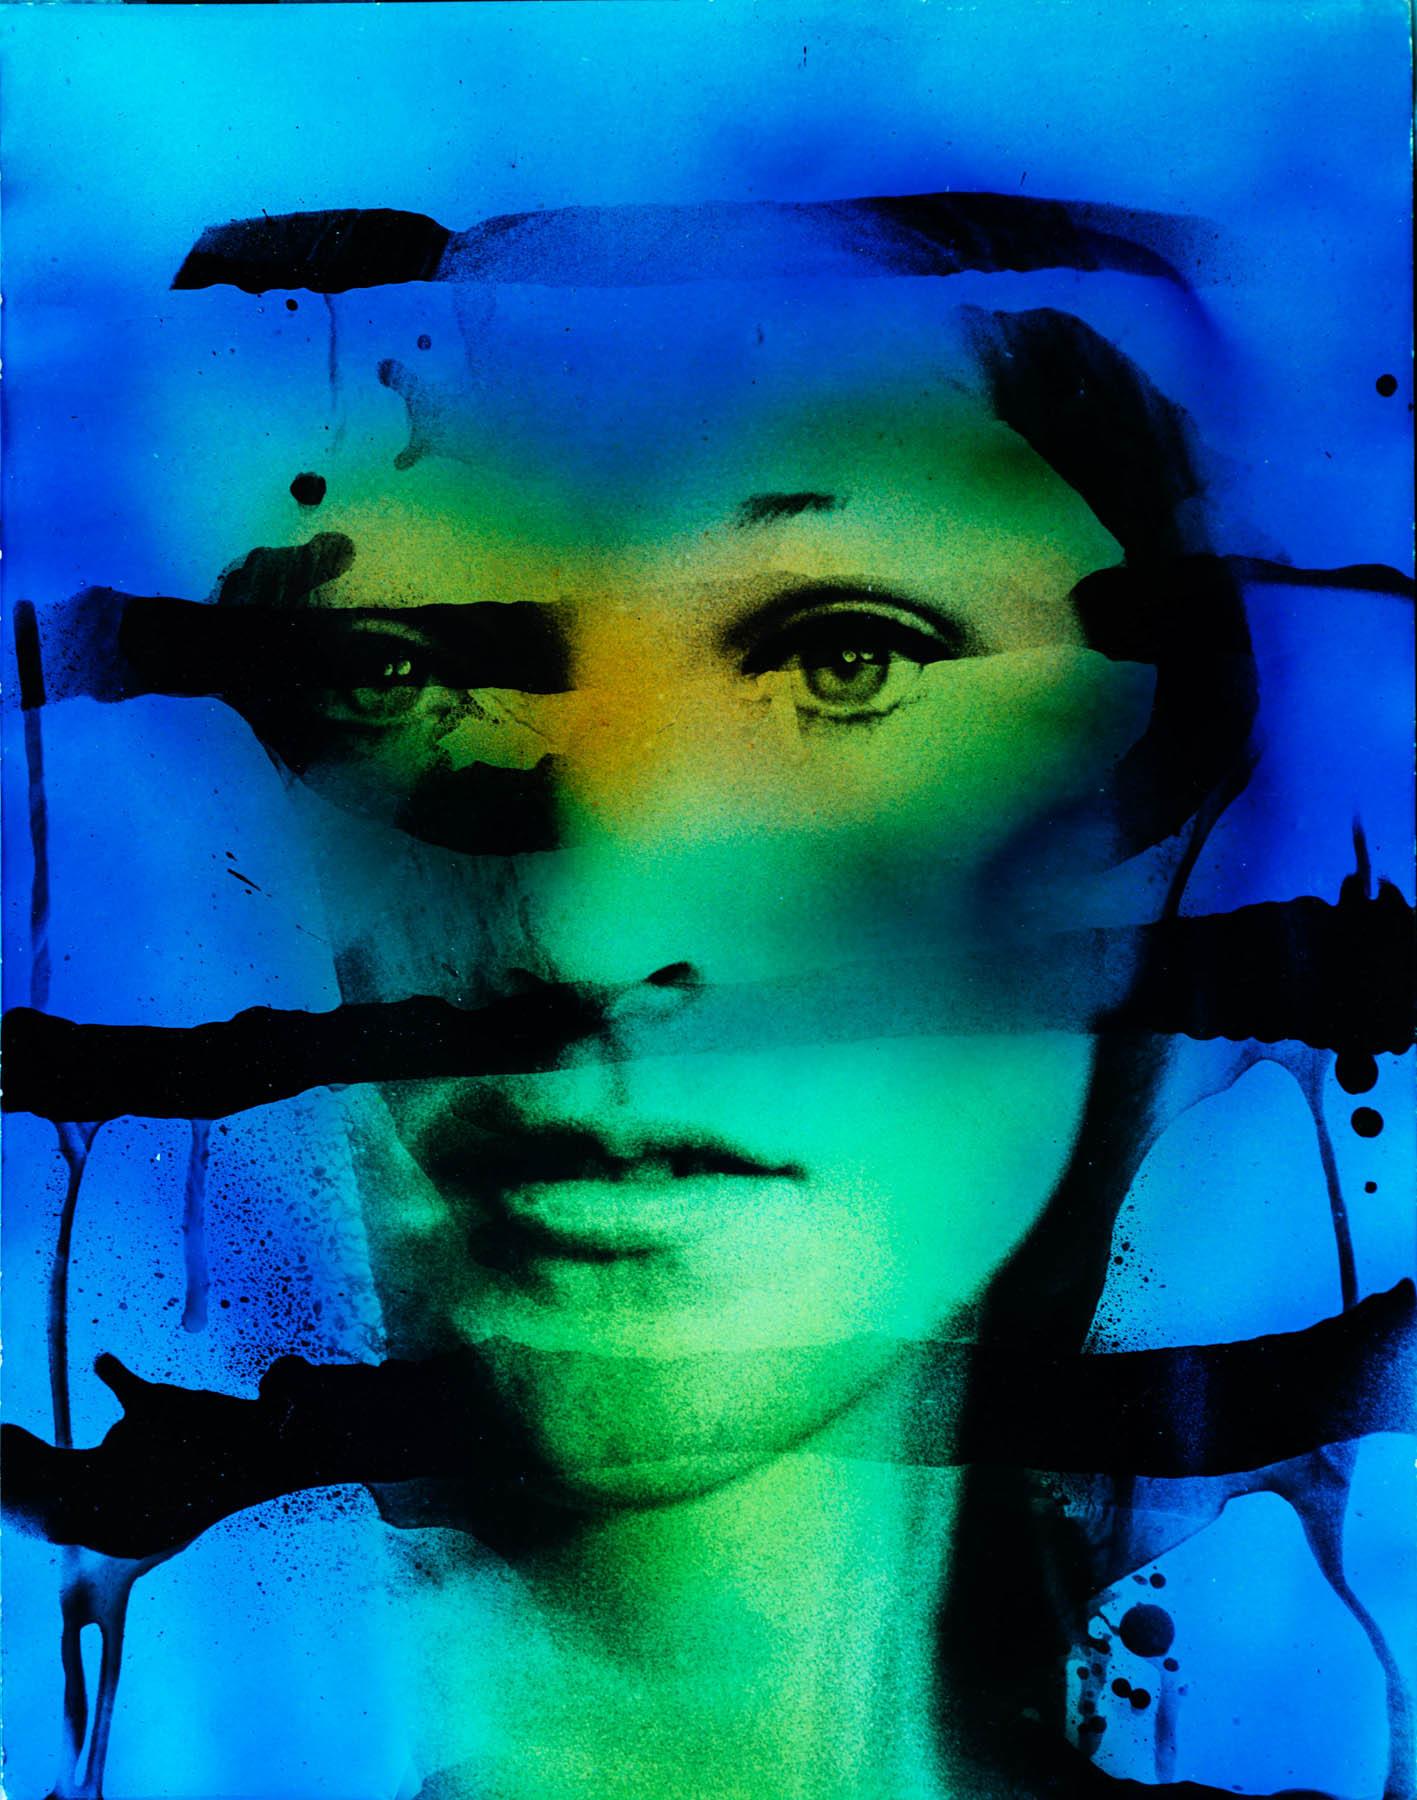 Face (Blue and Green), Palm Springs, CA - Photograph by Kali